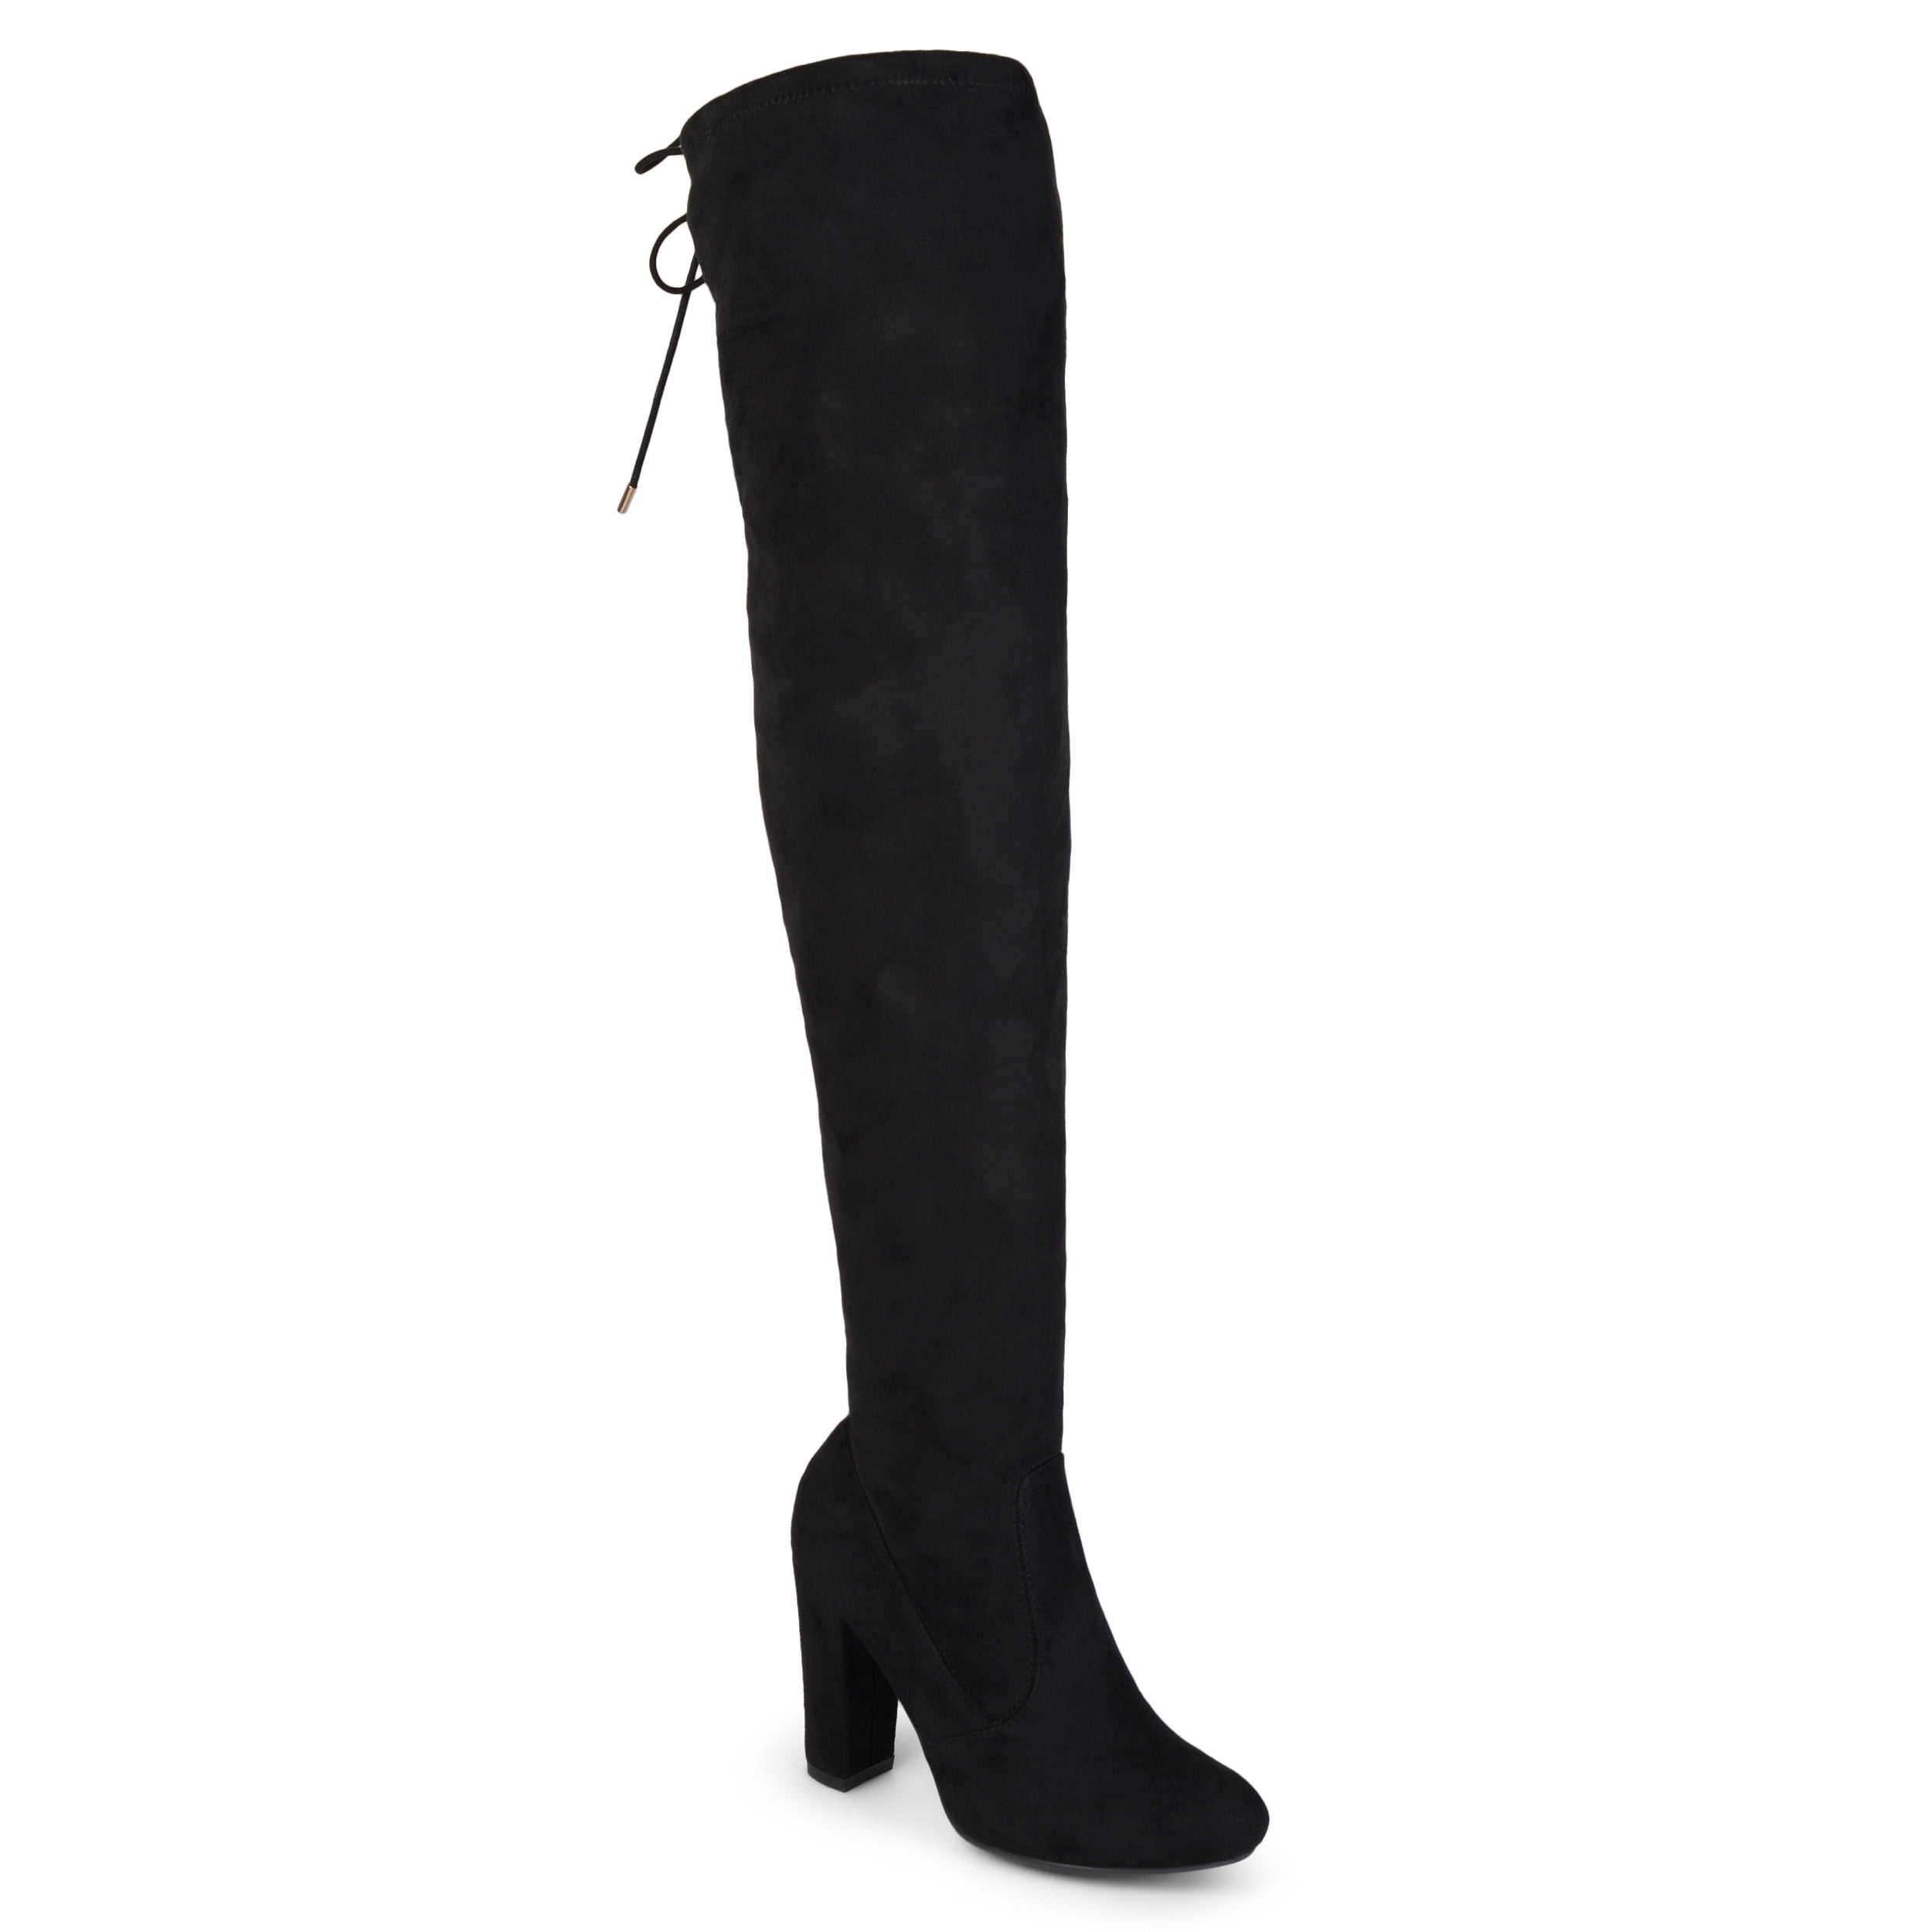 Details about   Women's Fashion Outdoor Zipper Chunky Heel Over The Knee High Suede Boots 34-45 